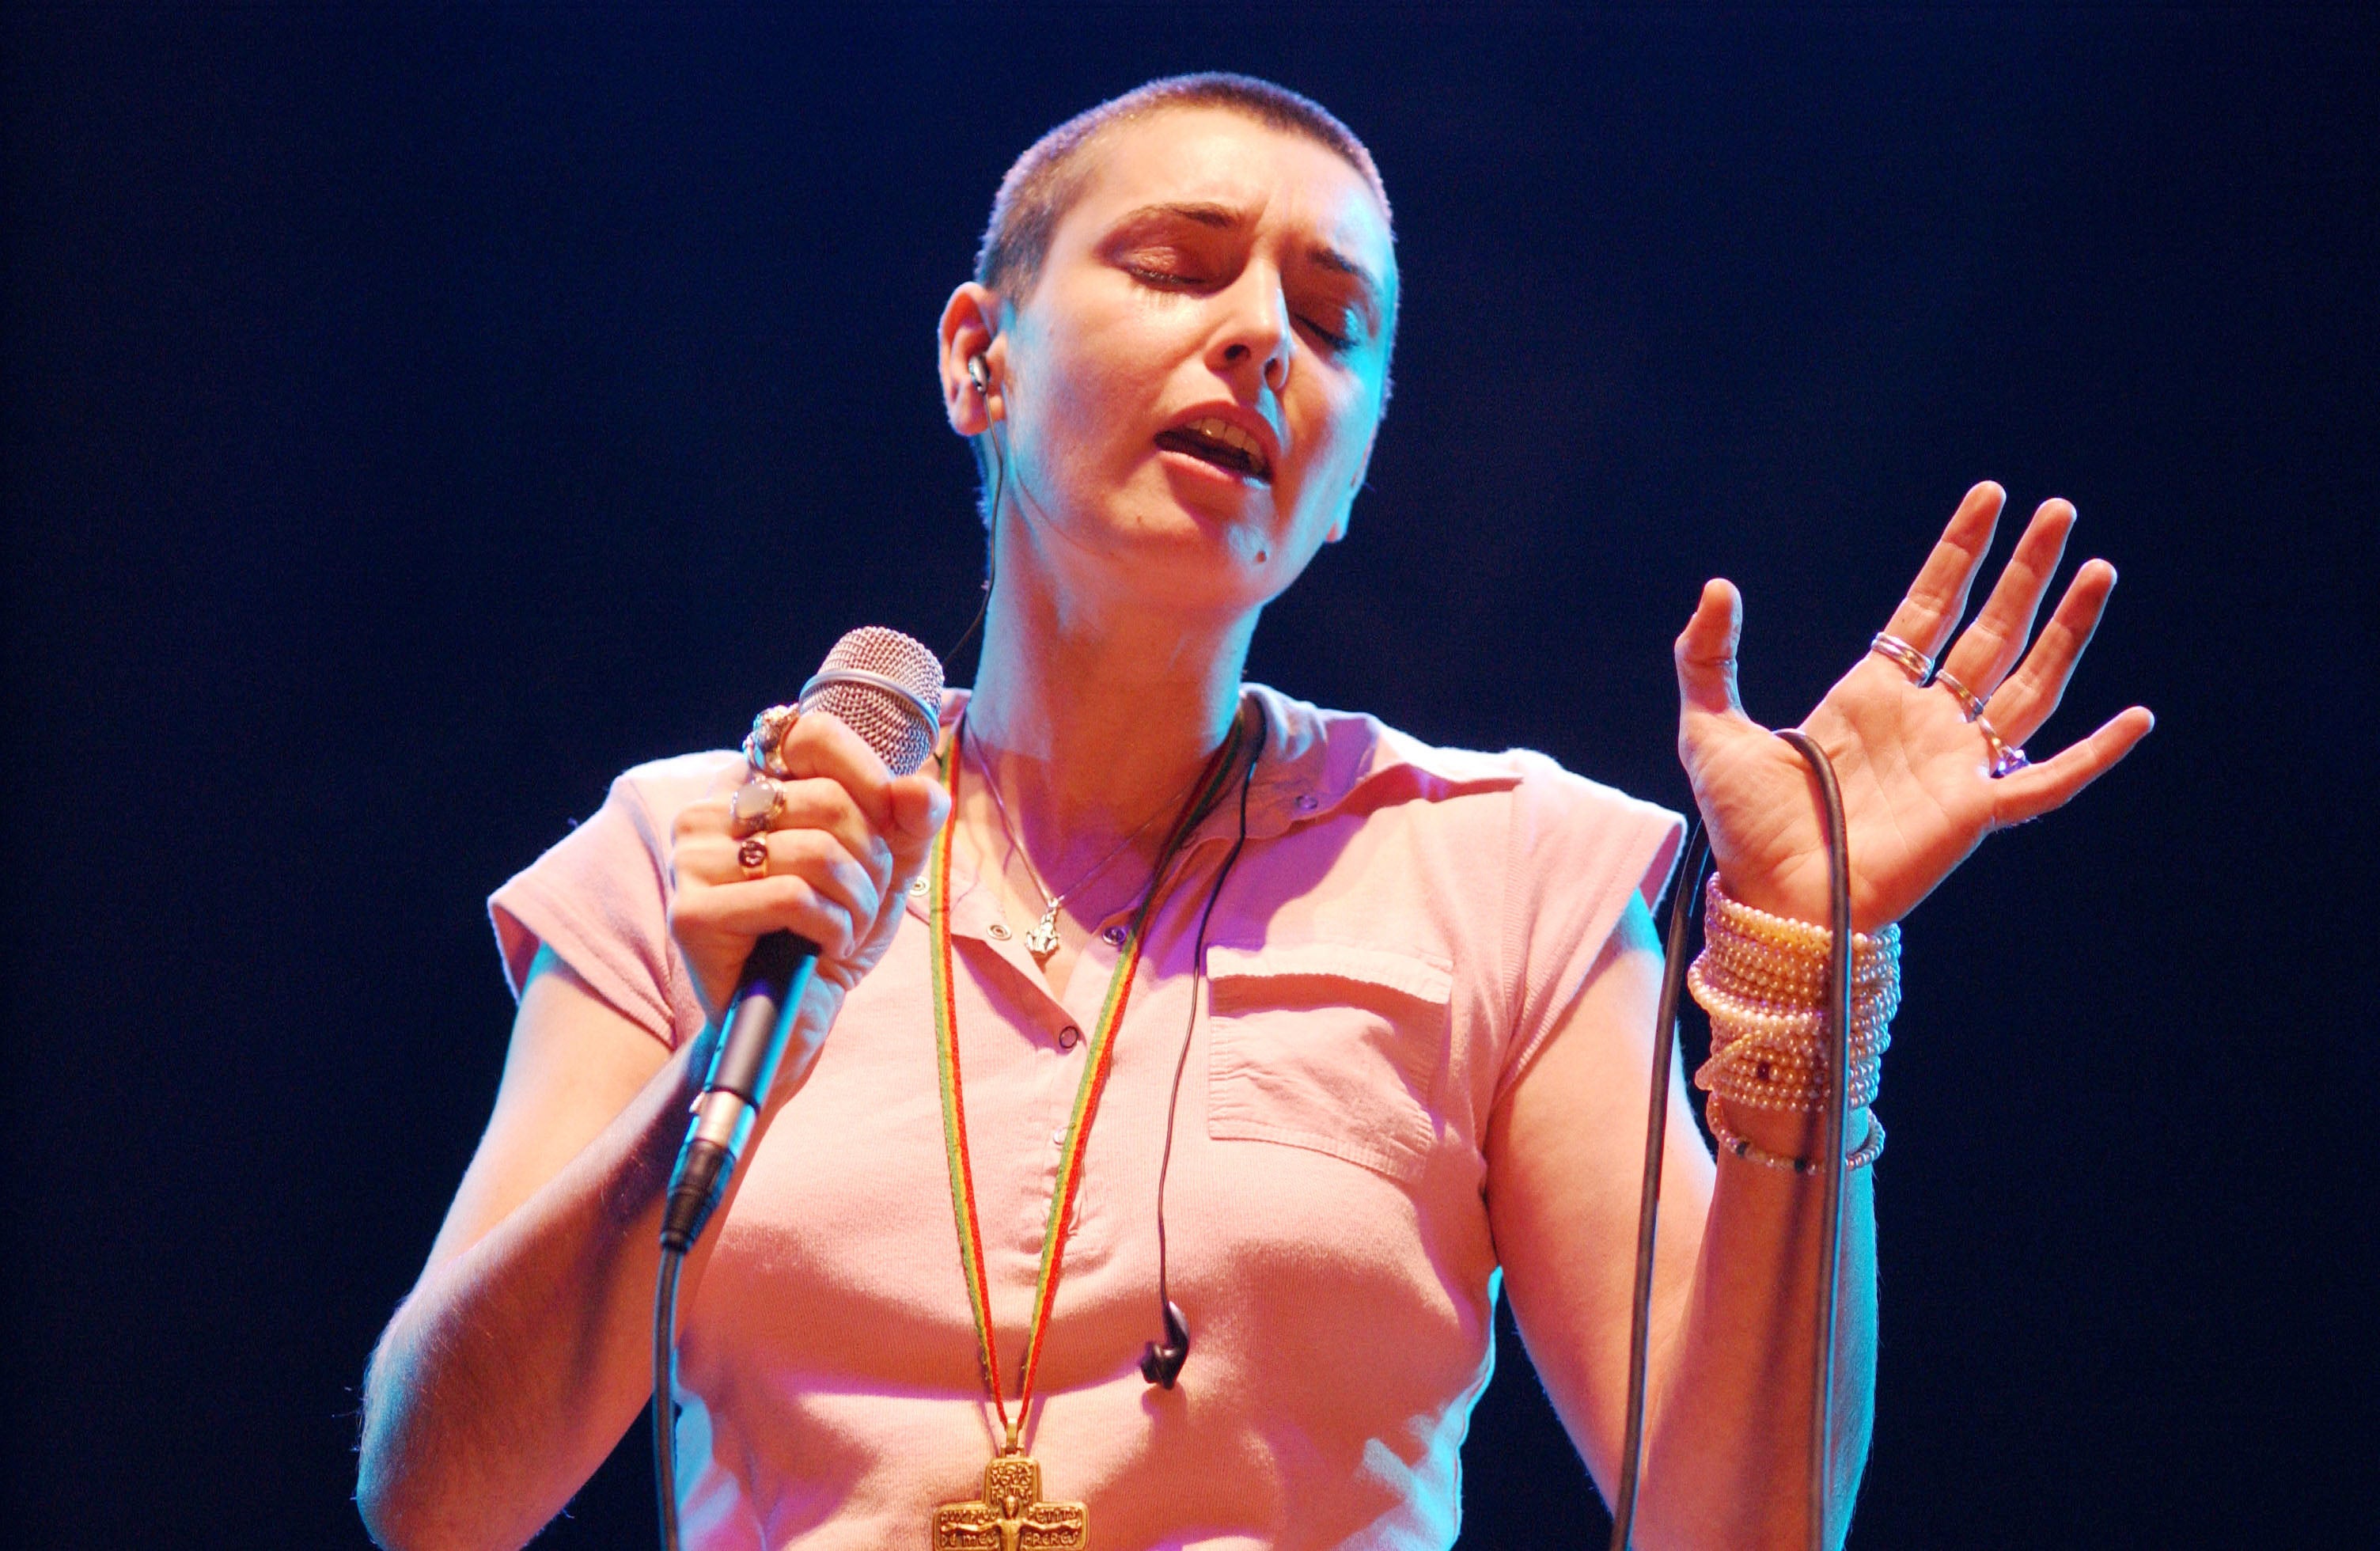 Sinead O’Connor sings in concert in 2003